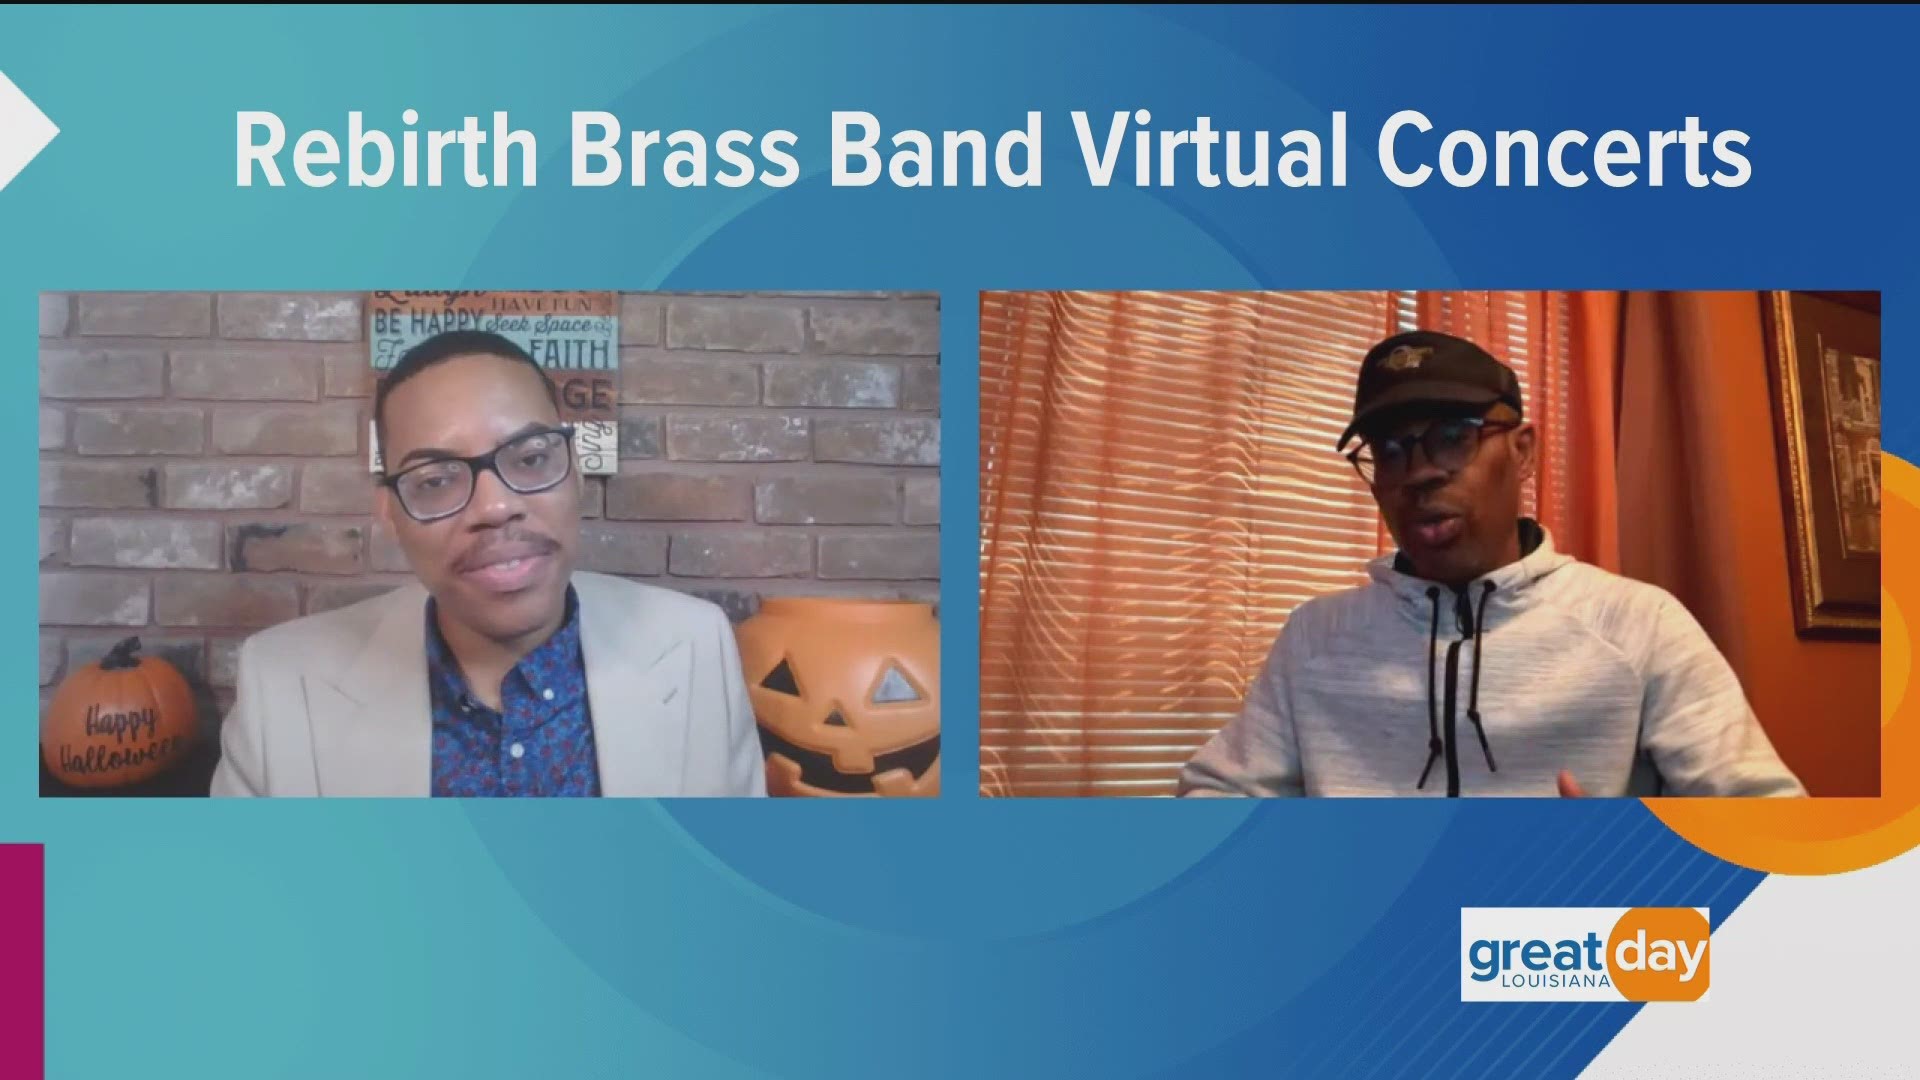 Keith Frazier of Rebirth Brass Brand discussed resuming their 29 year residency at "The Howlin' Wolf" in a virtual way.